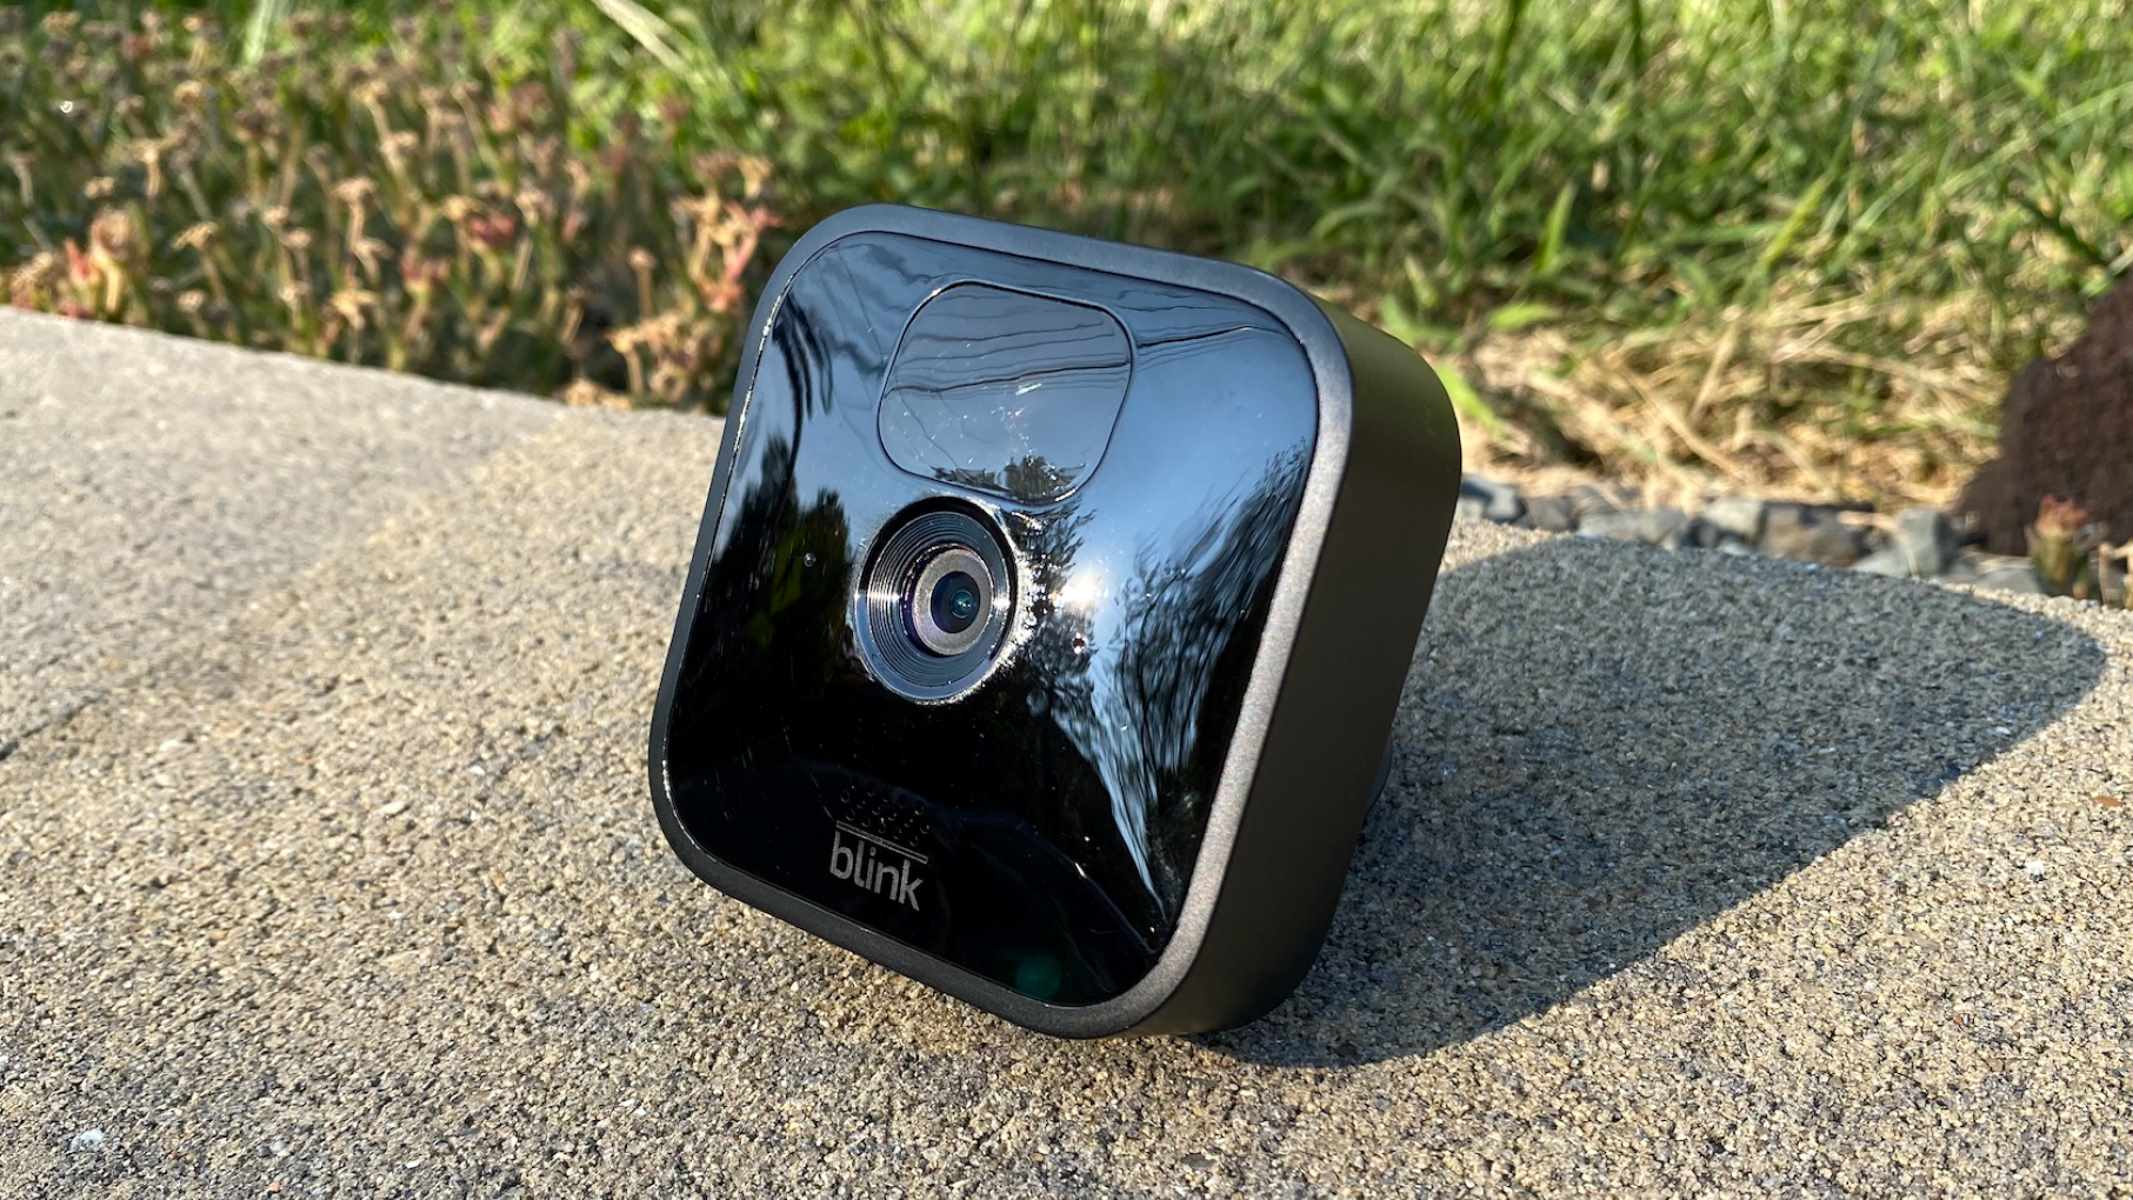 How Does Blink Outdoor Camera Work